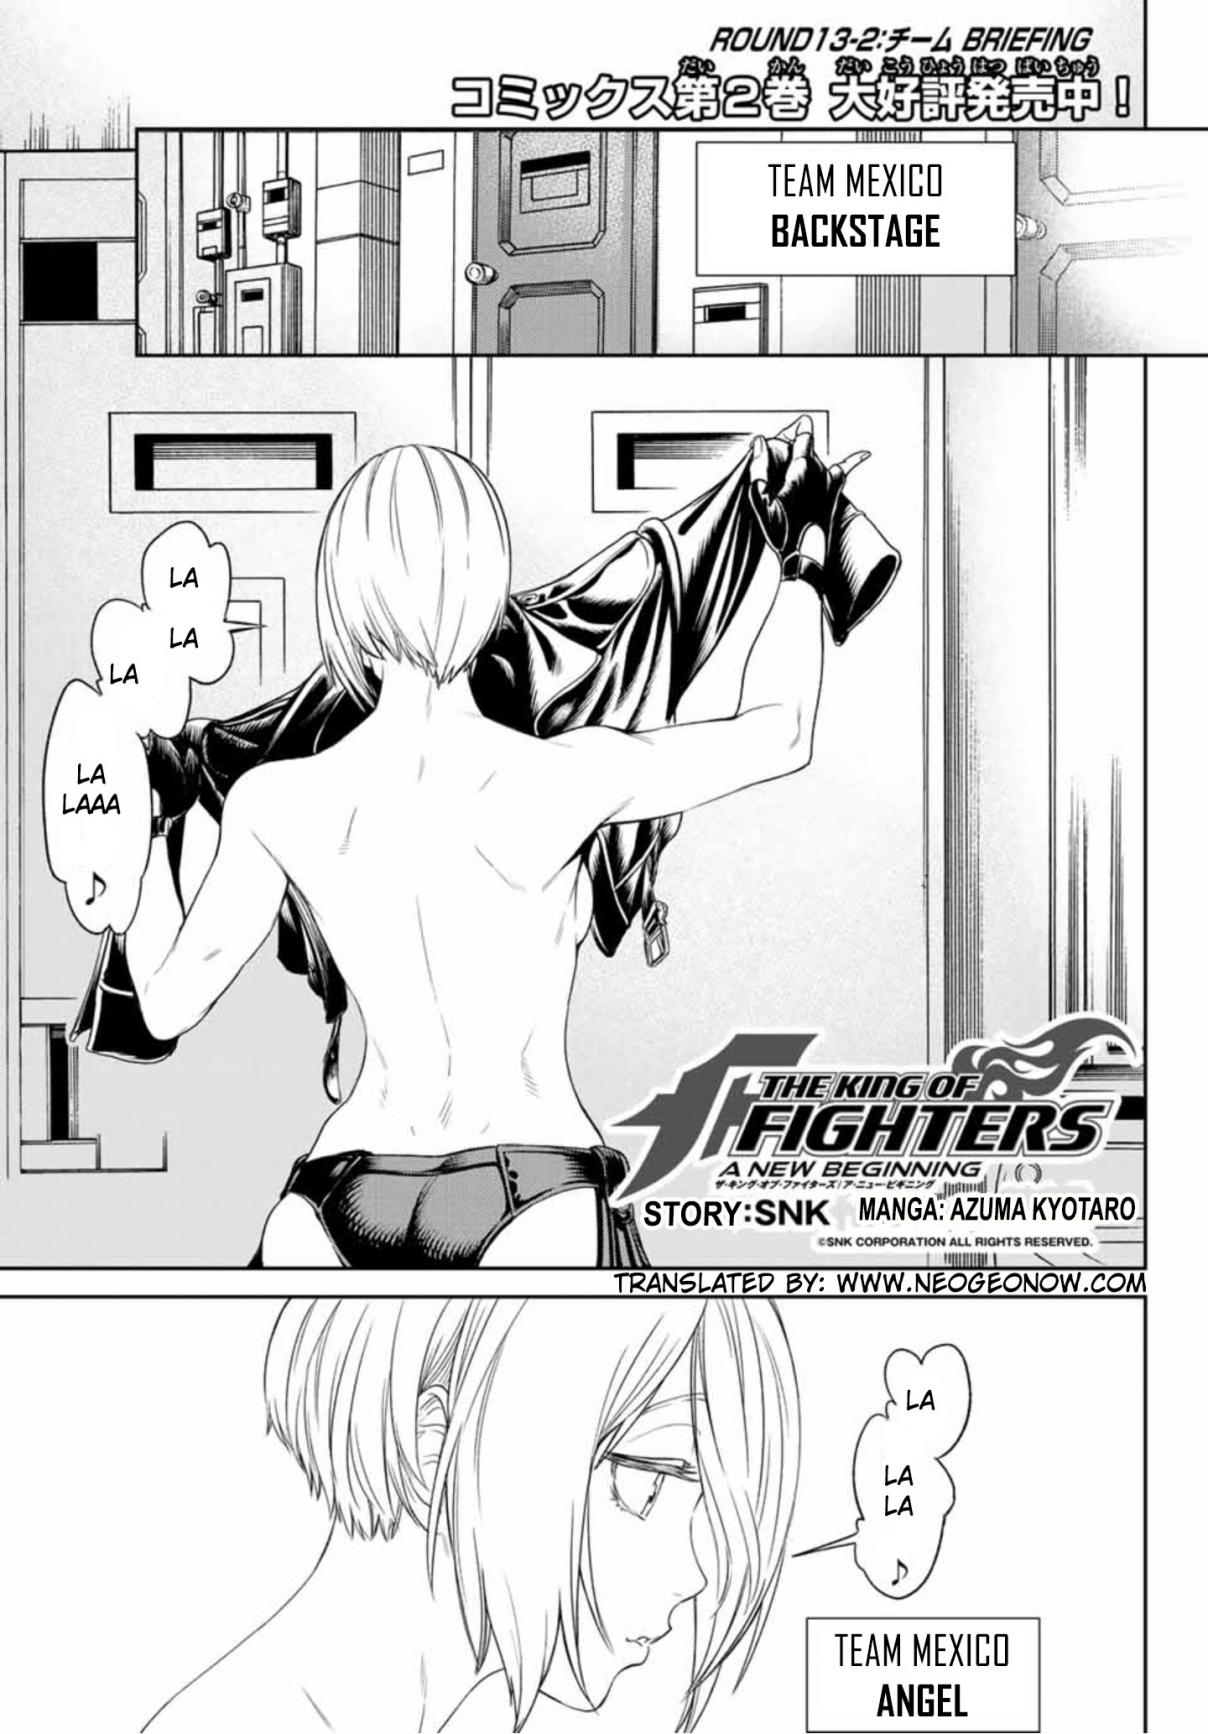 The King of Fighters: A New Beginning Ch. 13.2 Briefing